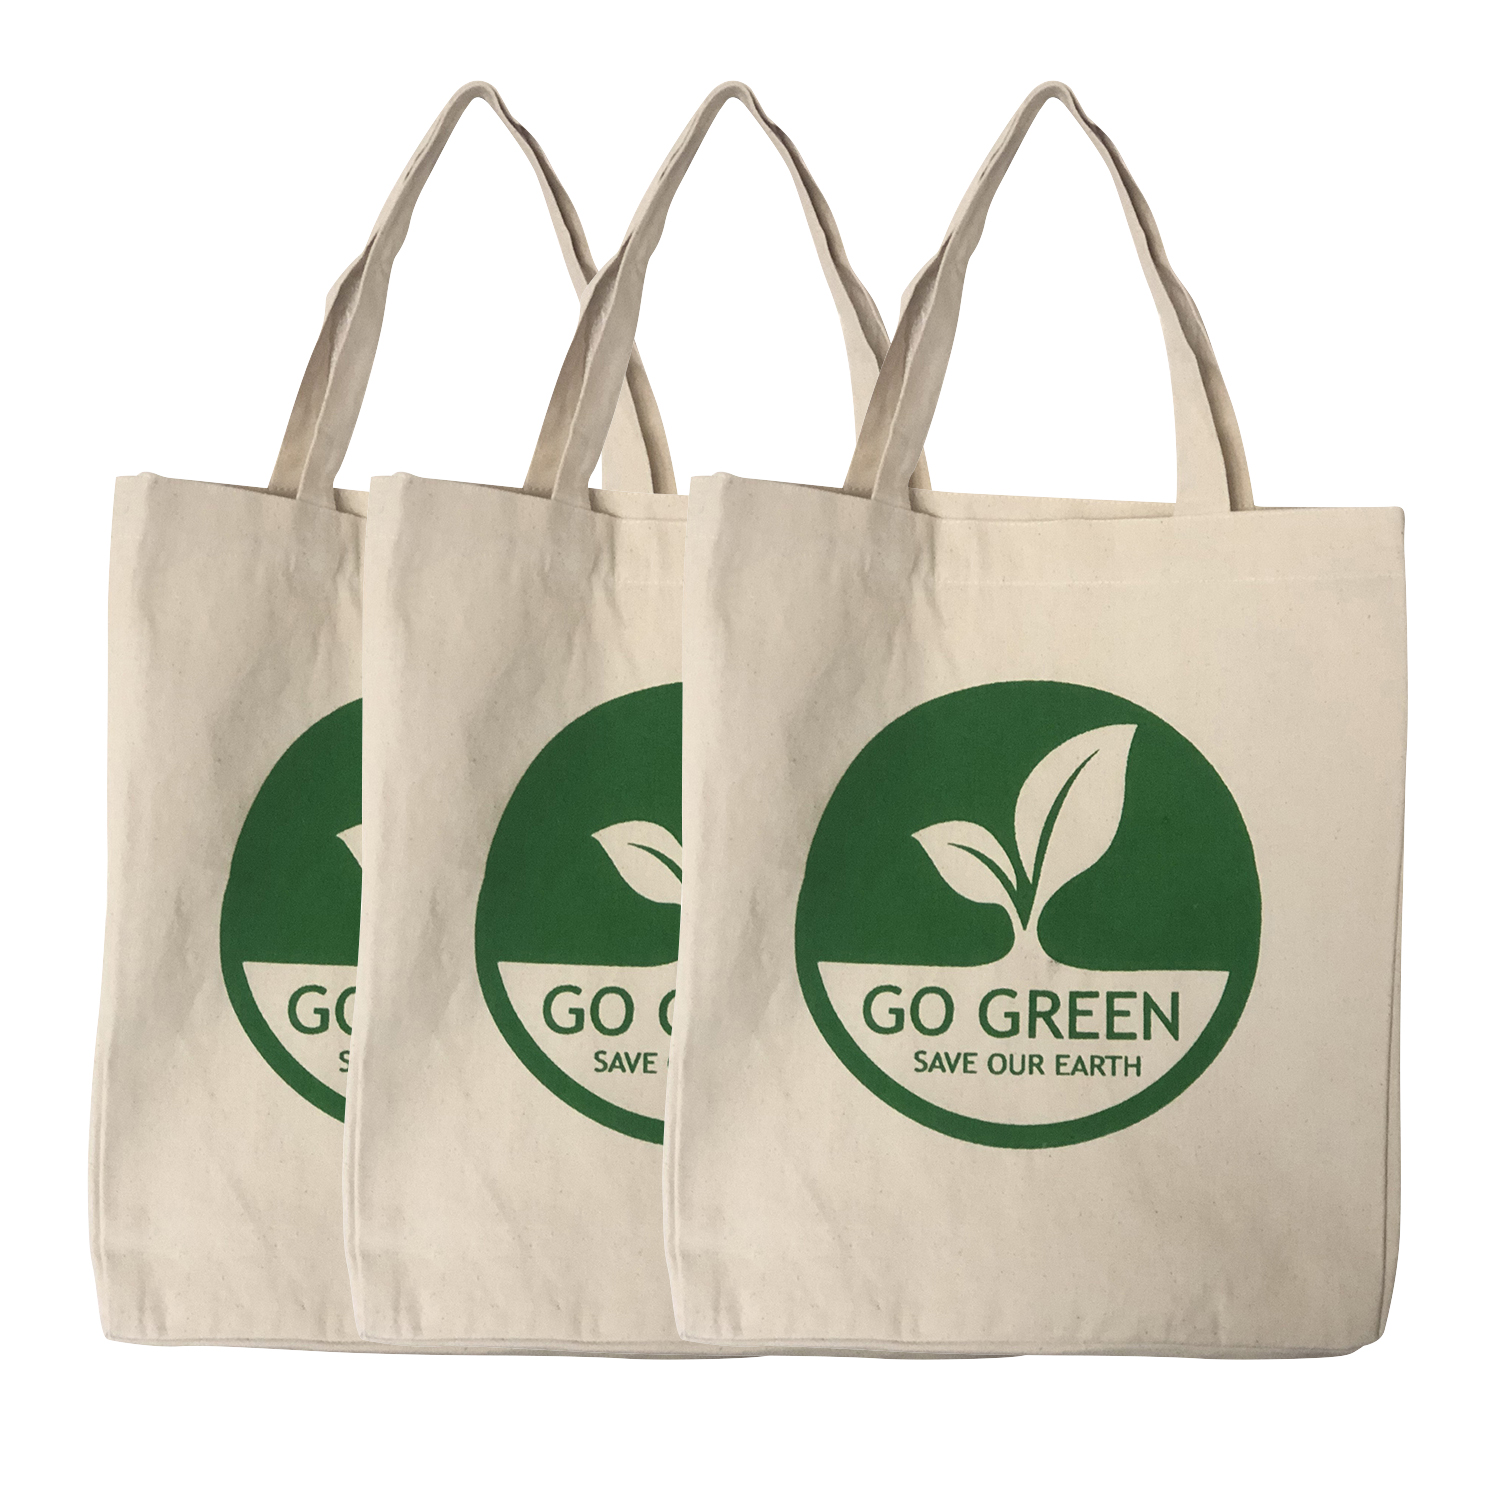 Go Green – 3 pack cotton shopping/tote bags…. – Online Global Store